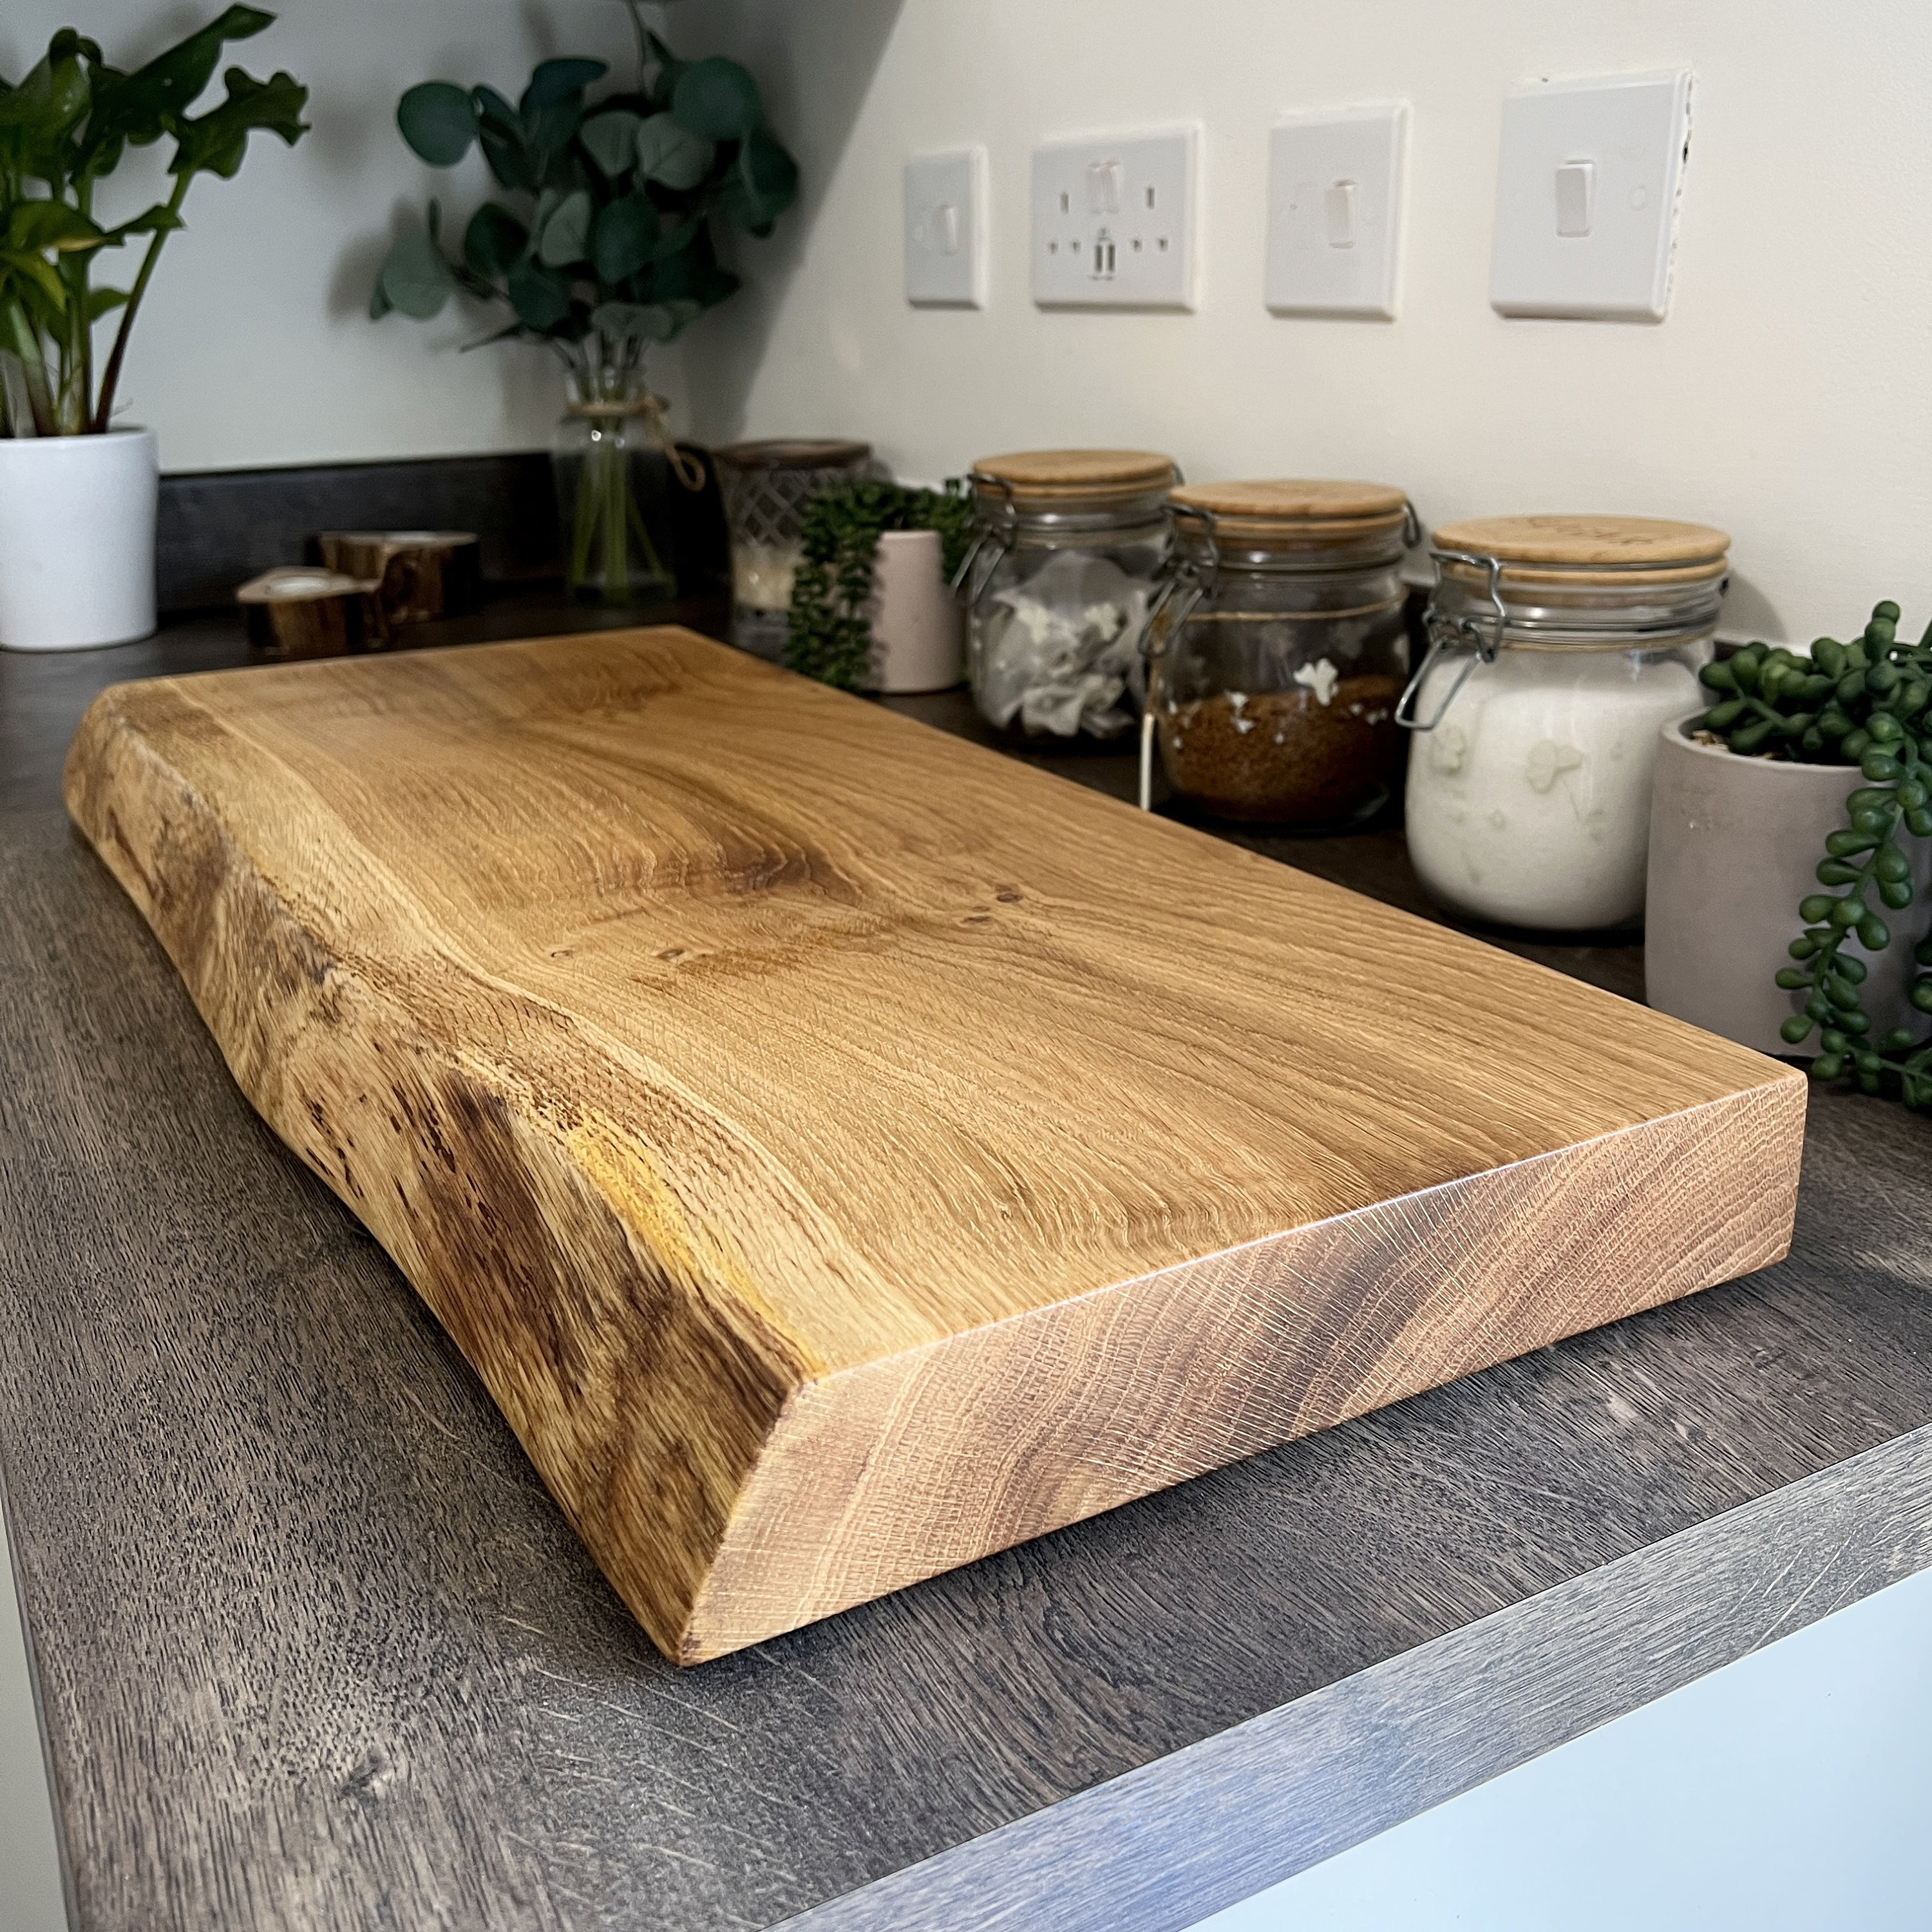 How to Choose the Best Large Cutting Board